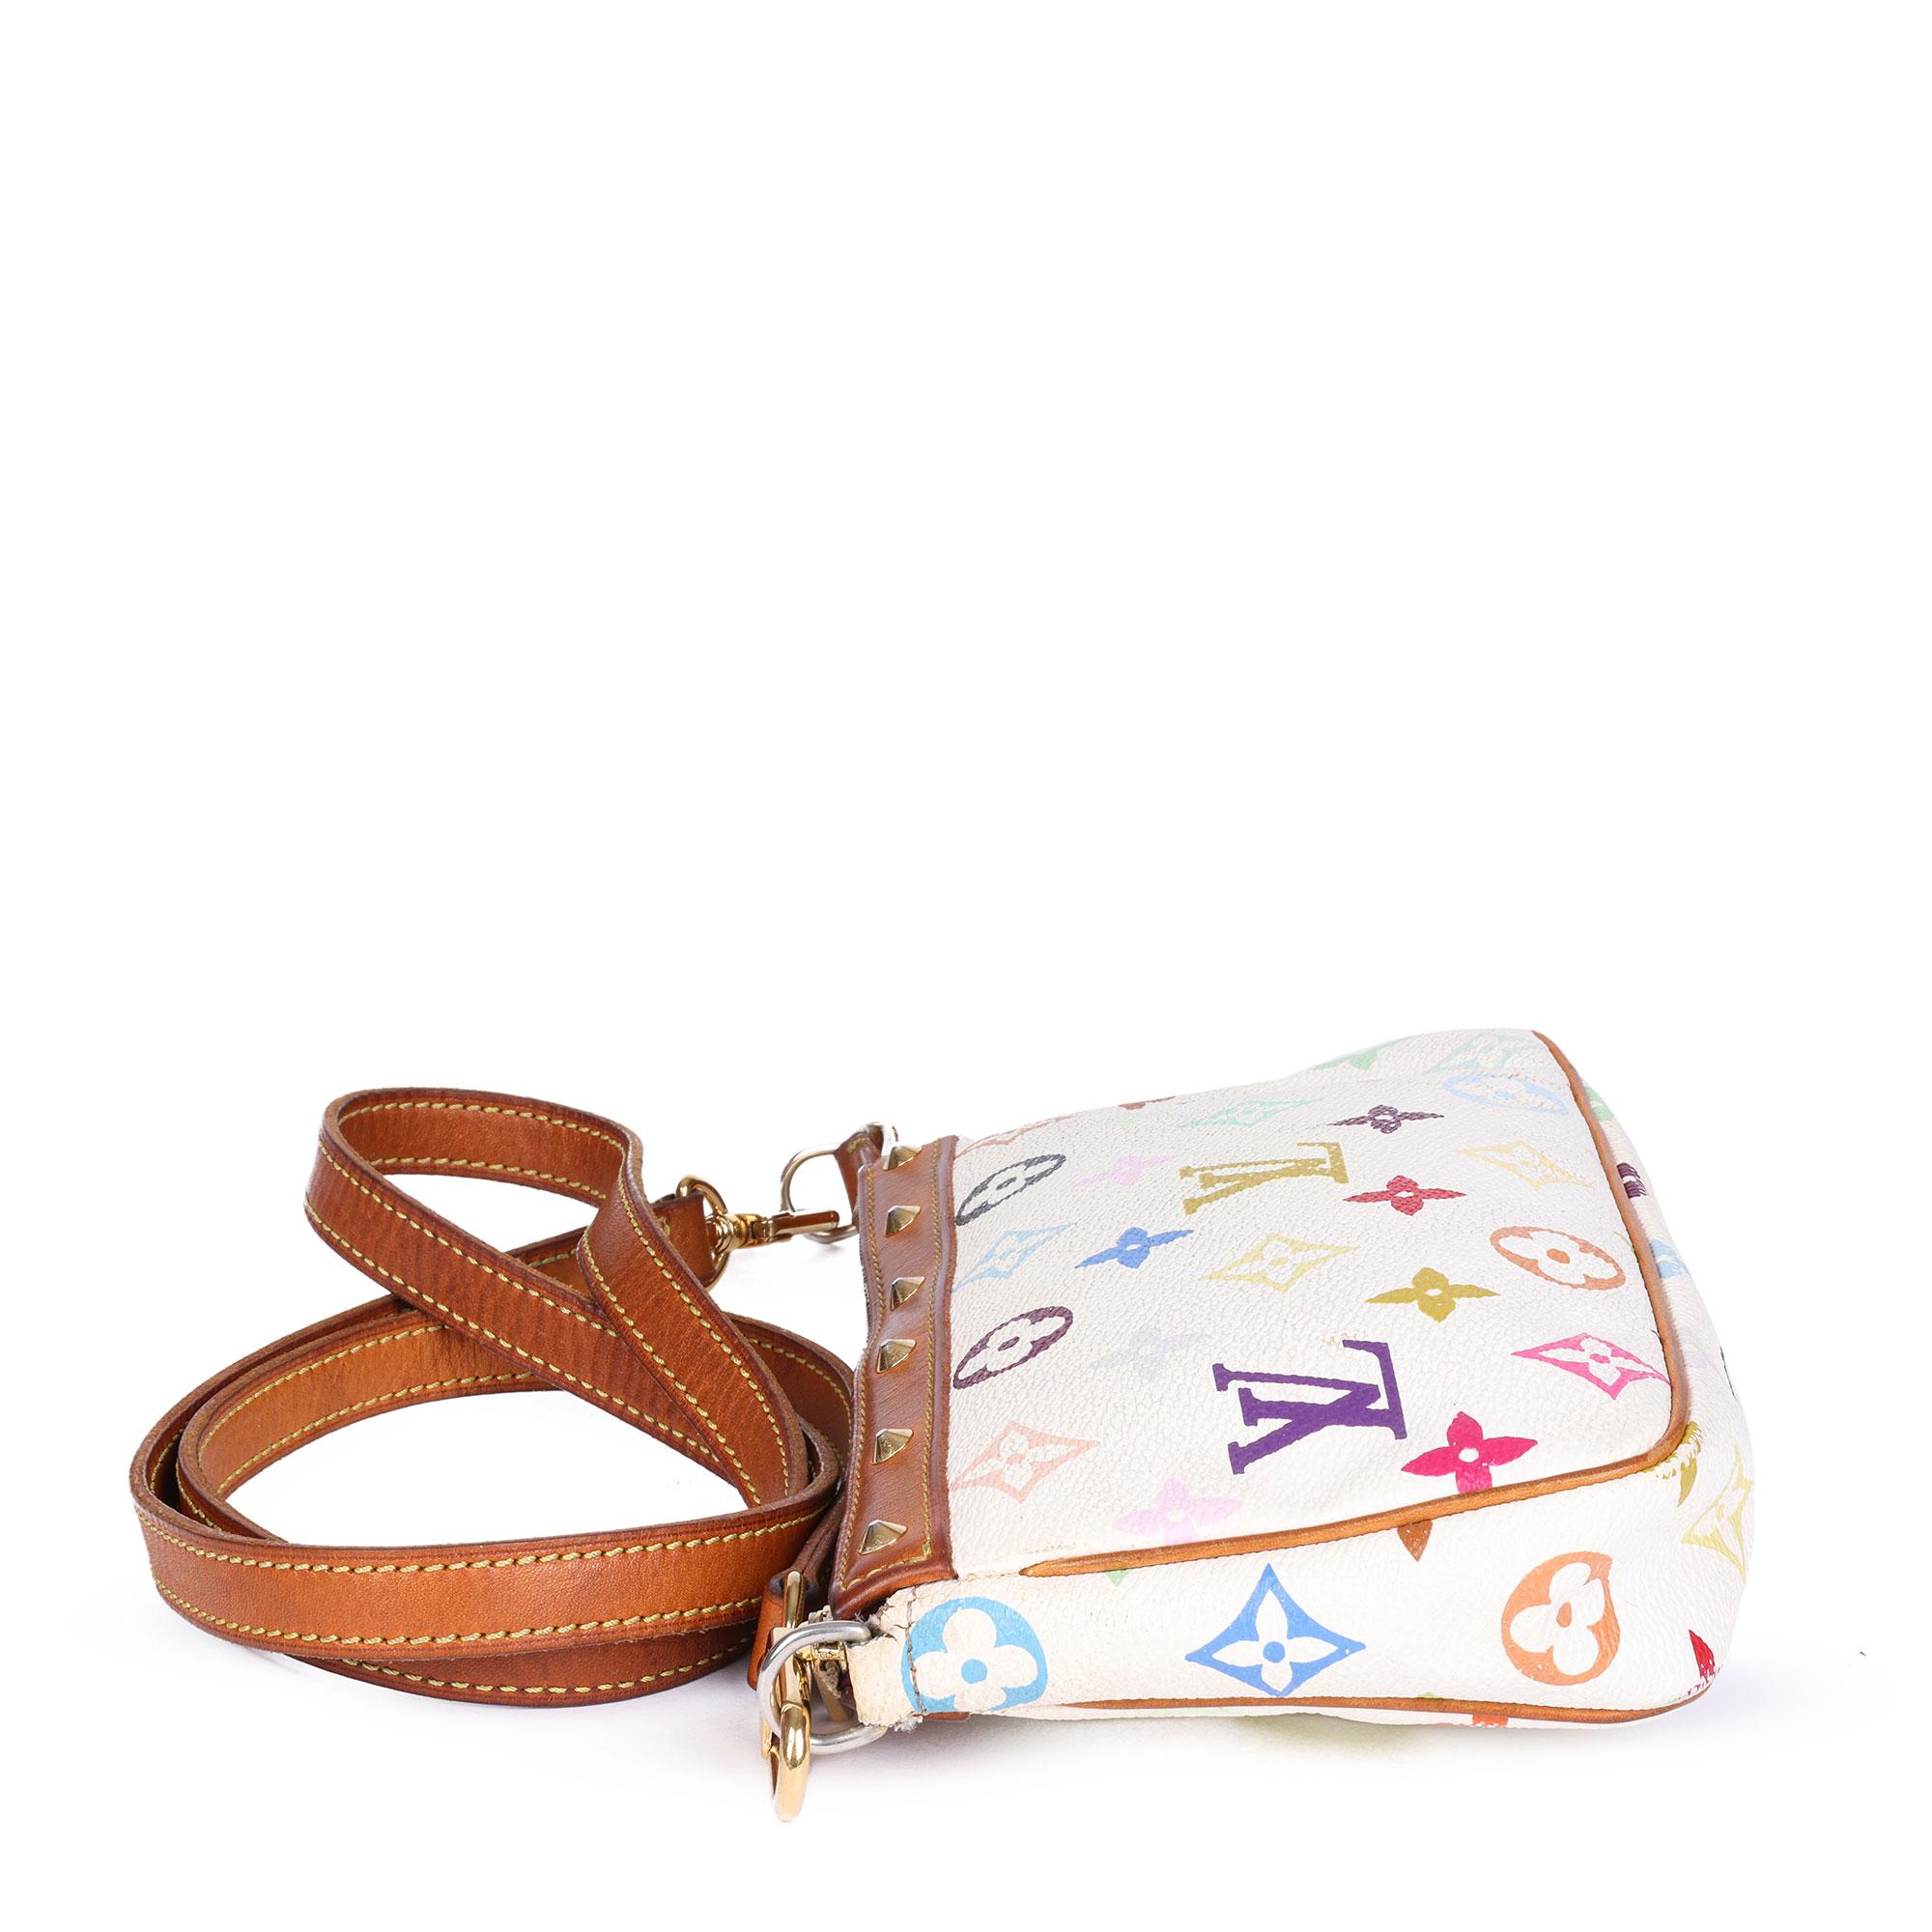 LOUIS VUITTON 
White Multicolour Monogram Coated Canvas & Vachetta Murakami Leather Pochette Accessoires

Age (Circa): 2003
Accompanied By: Replacement Vachetta Strap
Authenticity Details: Date Stamp is no longer visible (Made in France)
Gender: